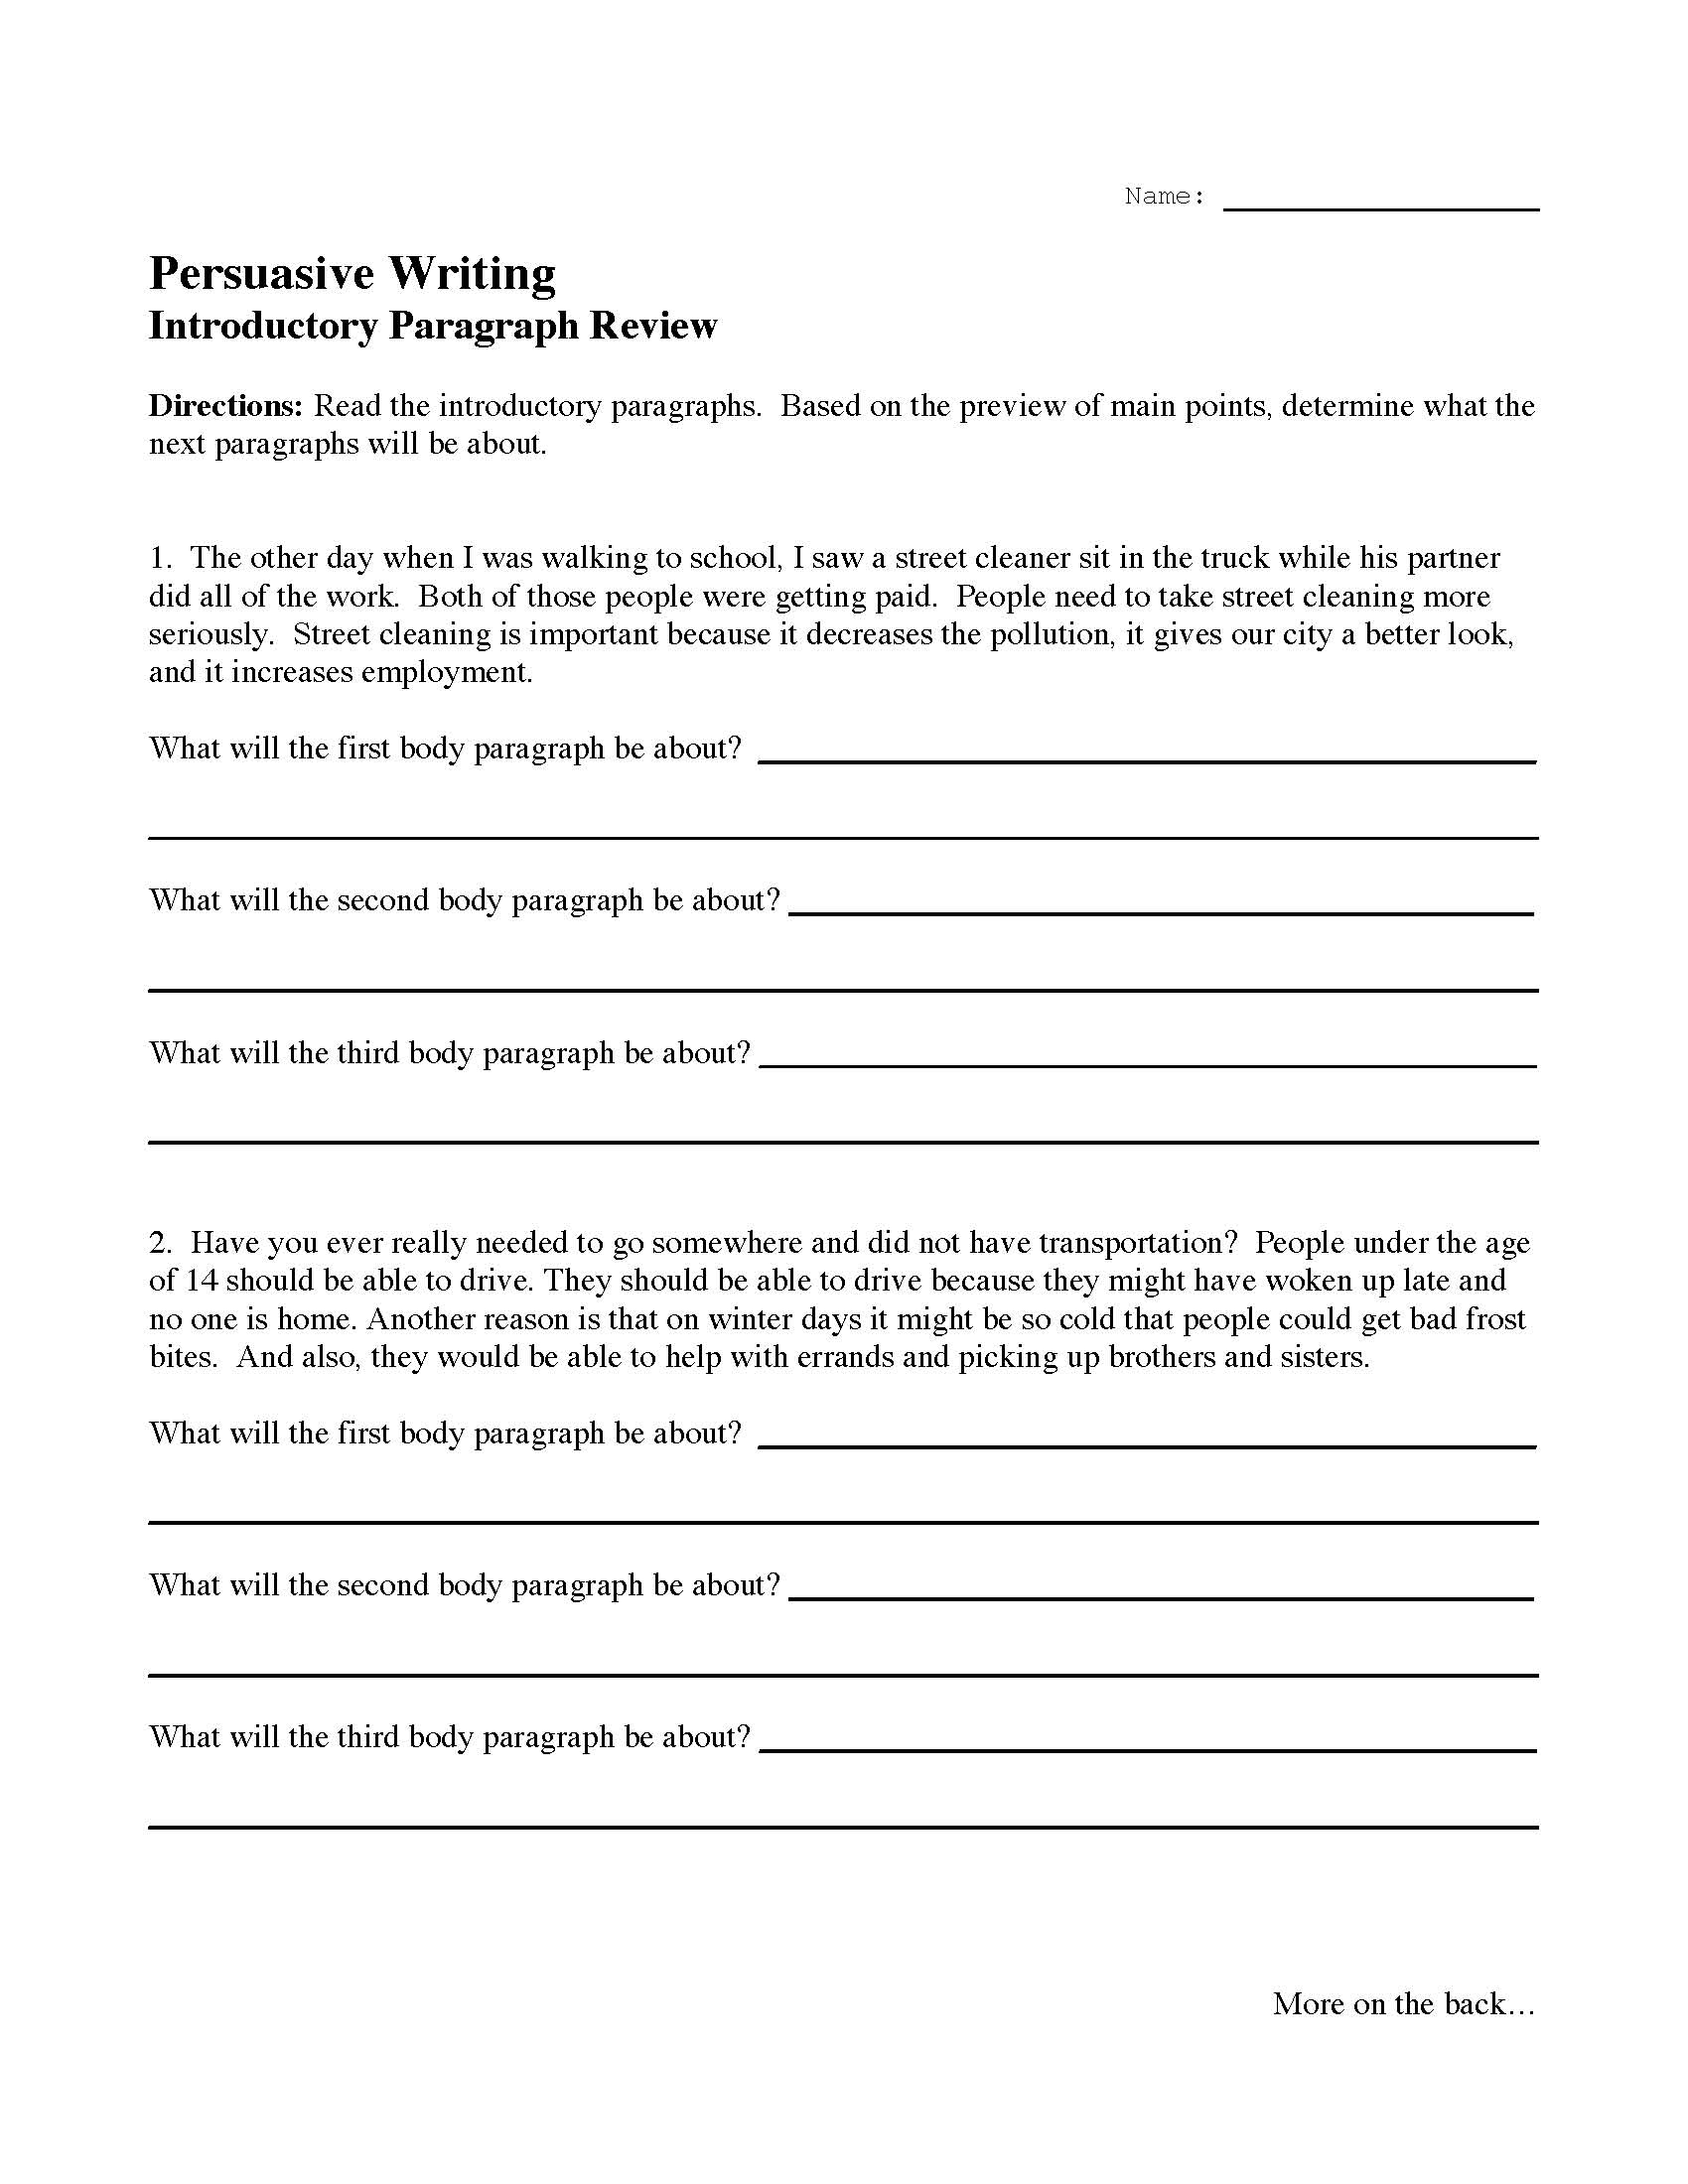 Introductory Paragraph Review Activity Preview